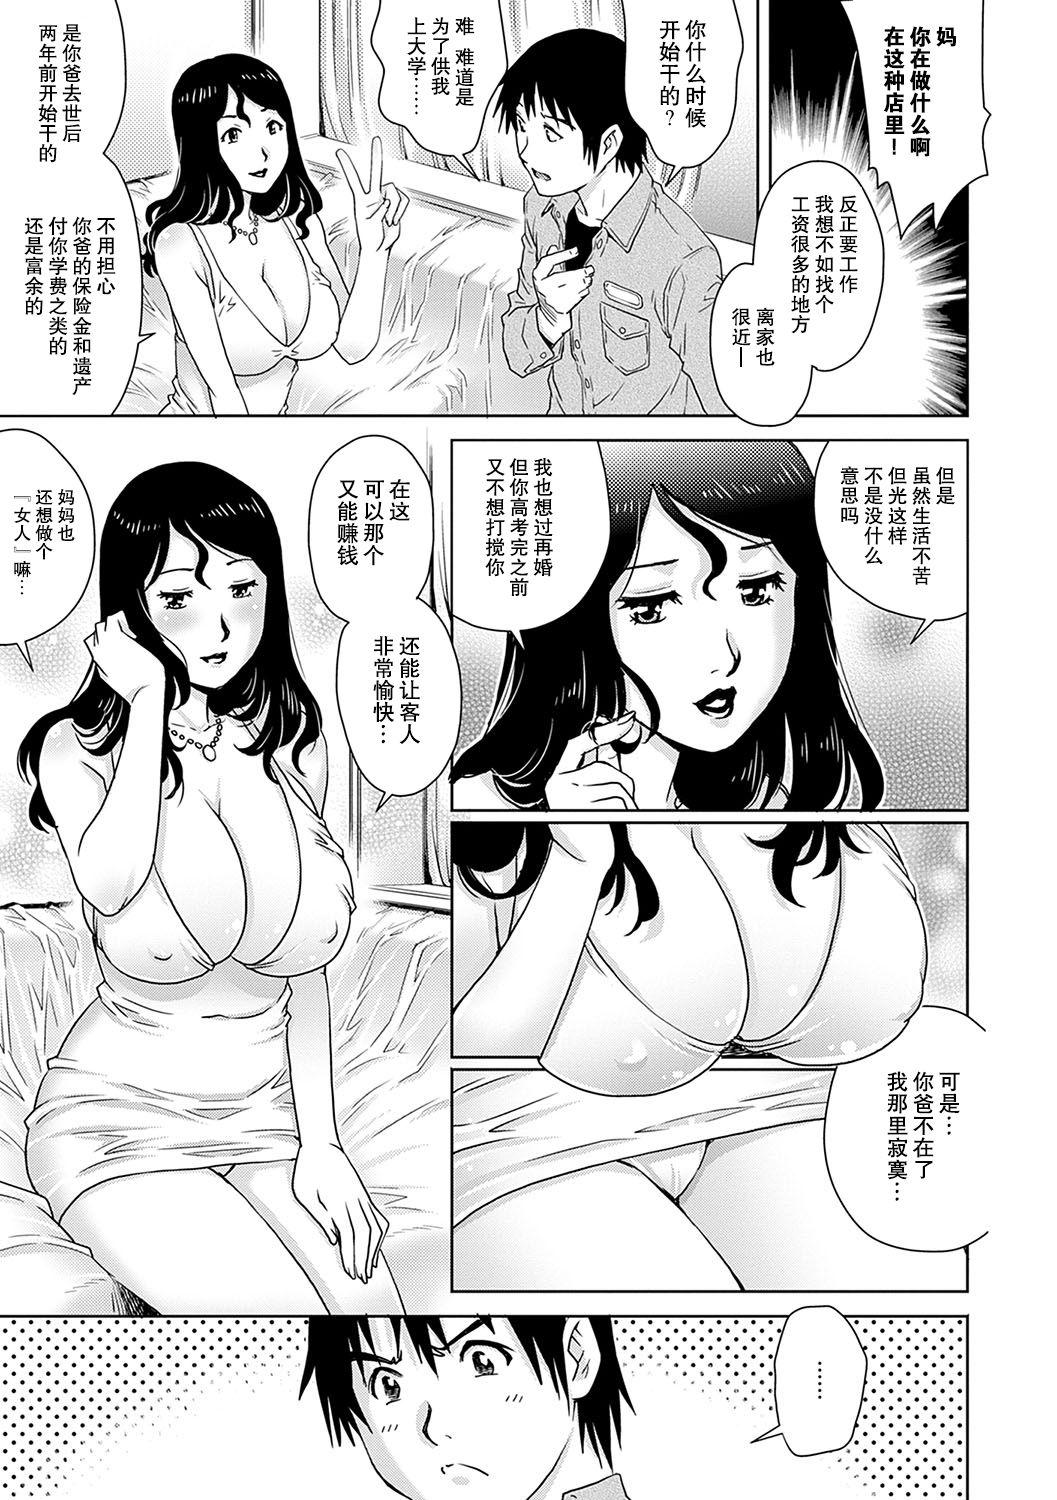 From Mama Soap | 母泡泡浴 Femdom - Page 5